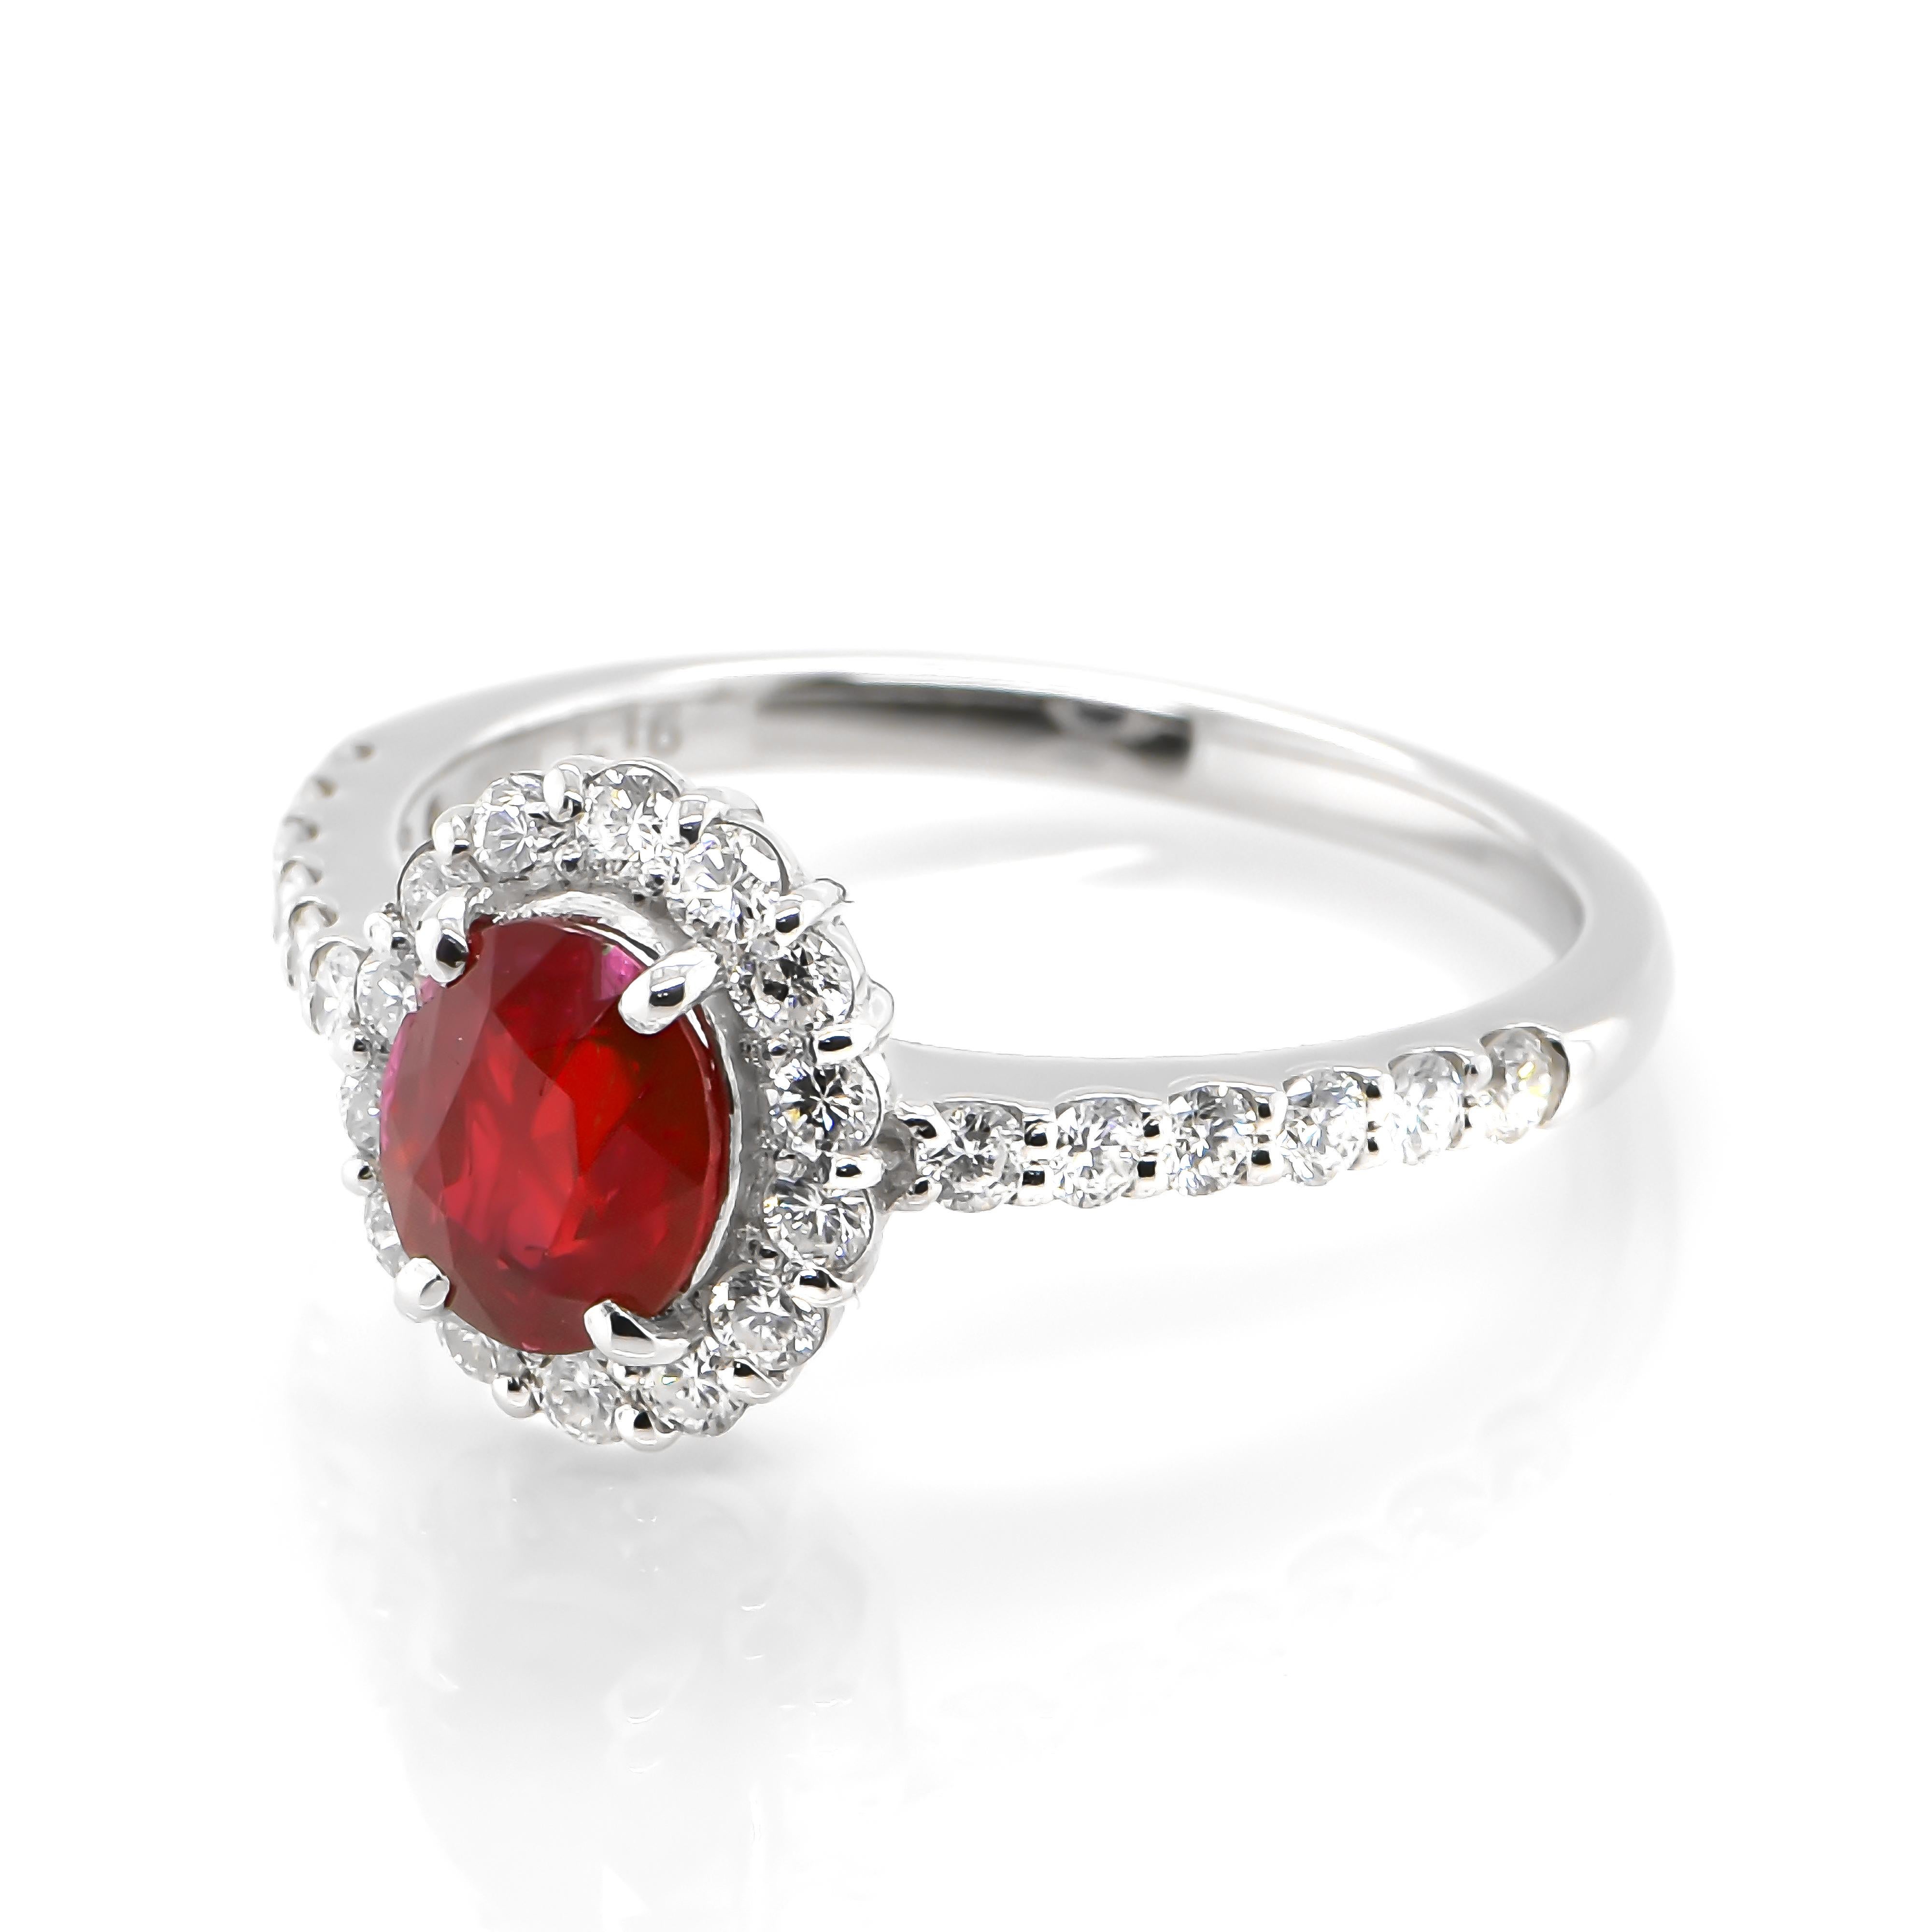 Modern GIA Certified 1.16 Carat, No Heat, Blood Red, Burmese Ruby Ring Made in Platinum For Sale